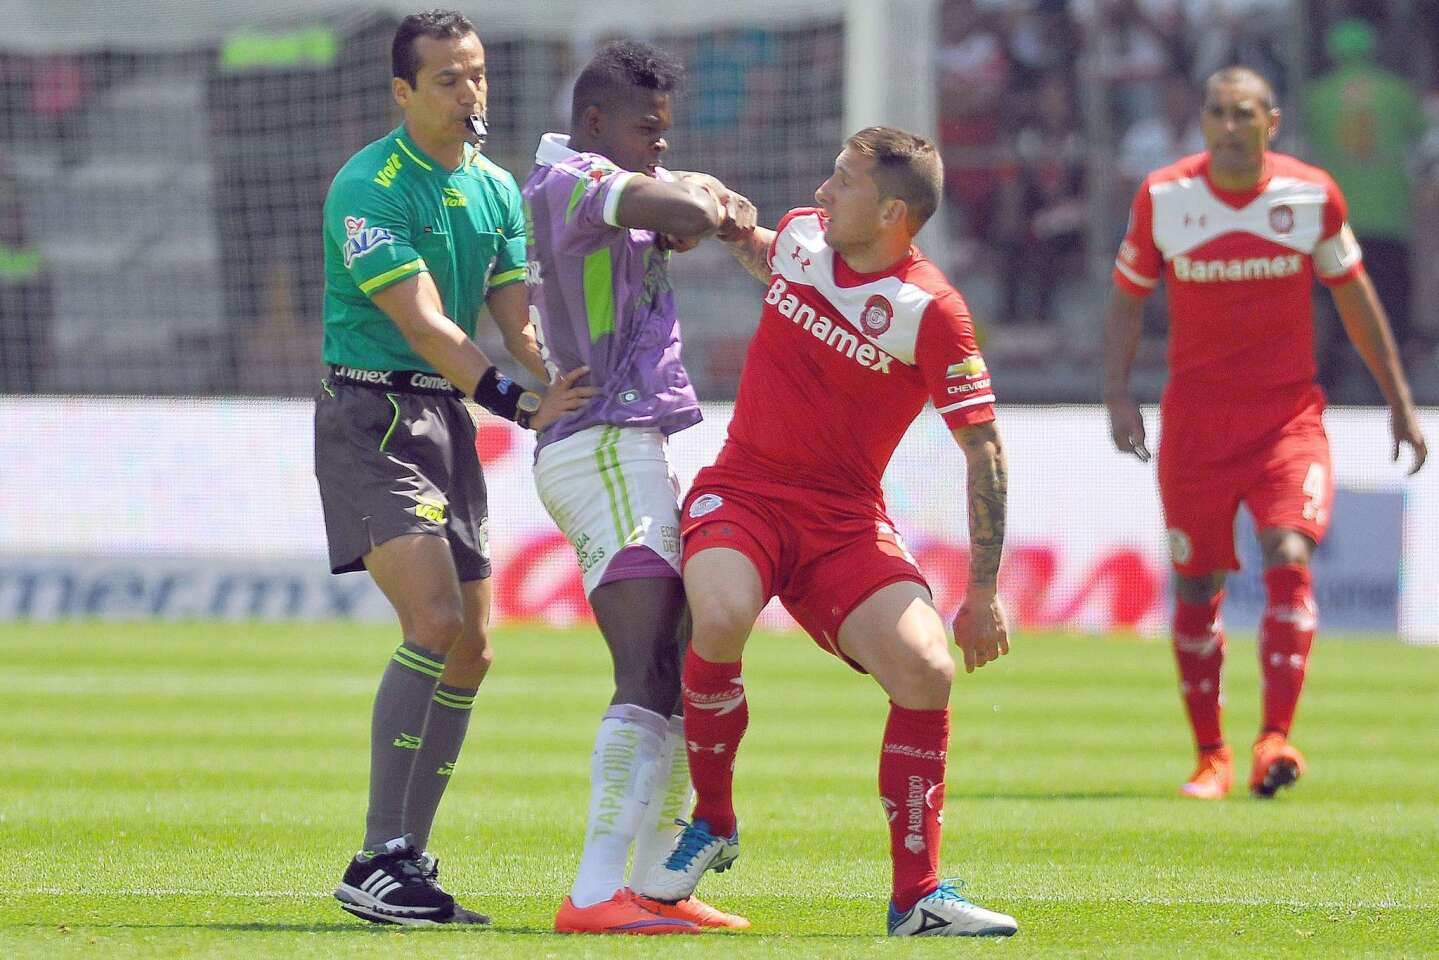 Dario Bottinelli (R) of Toluca fights with Aviles Hurtado (L) Chiapas during their Mexican Apertura 2015 tournament football match at the Nemesio Dies stadium on September 20, 2015, in Toluca, Mexico. AFP PHOTO/MARIA CALLSMARIA CALLS/AFP/Getty Images ** OUTS - ELSENT, FPG - OUTS * NM, PH, VA if sourced by CT, LA or MoD **